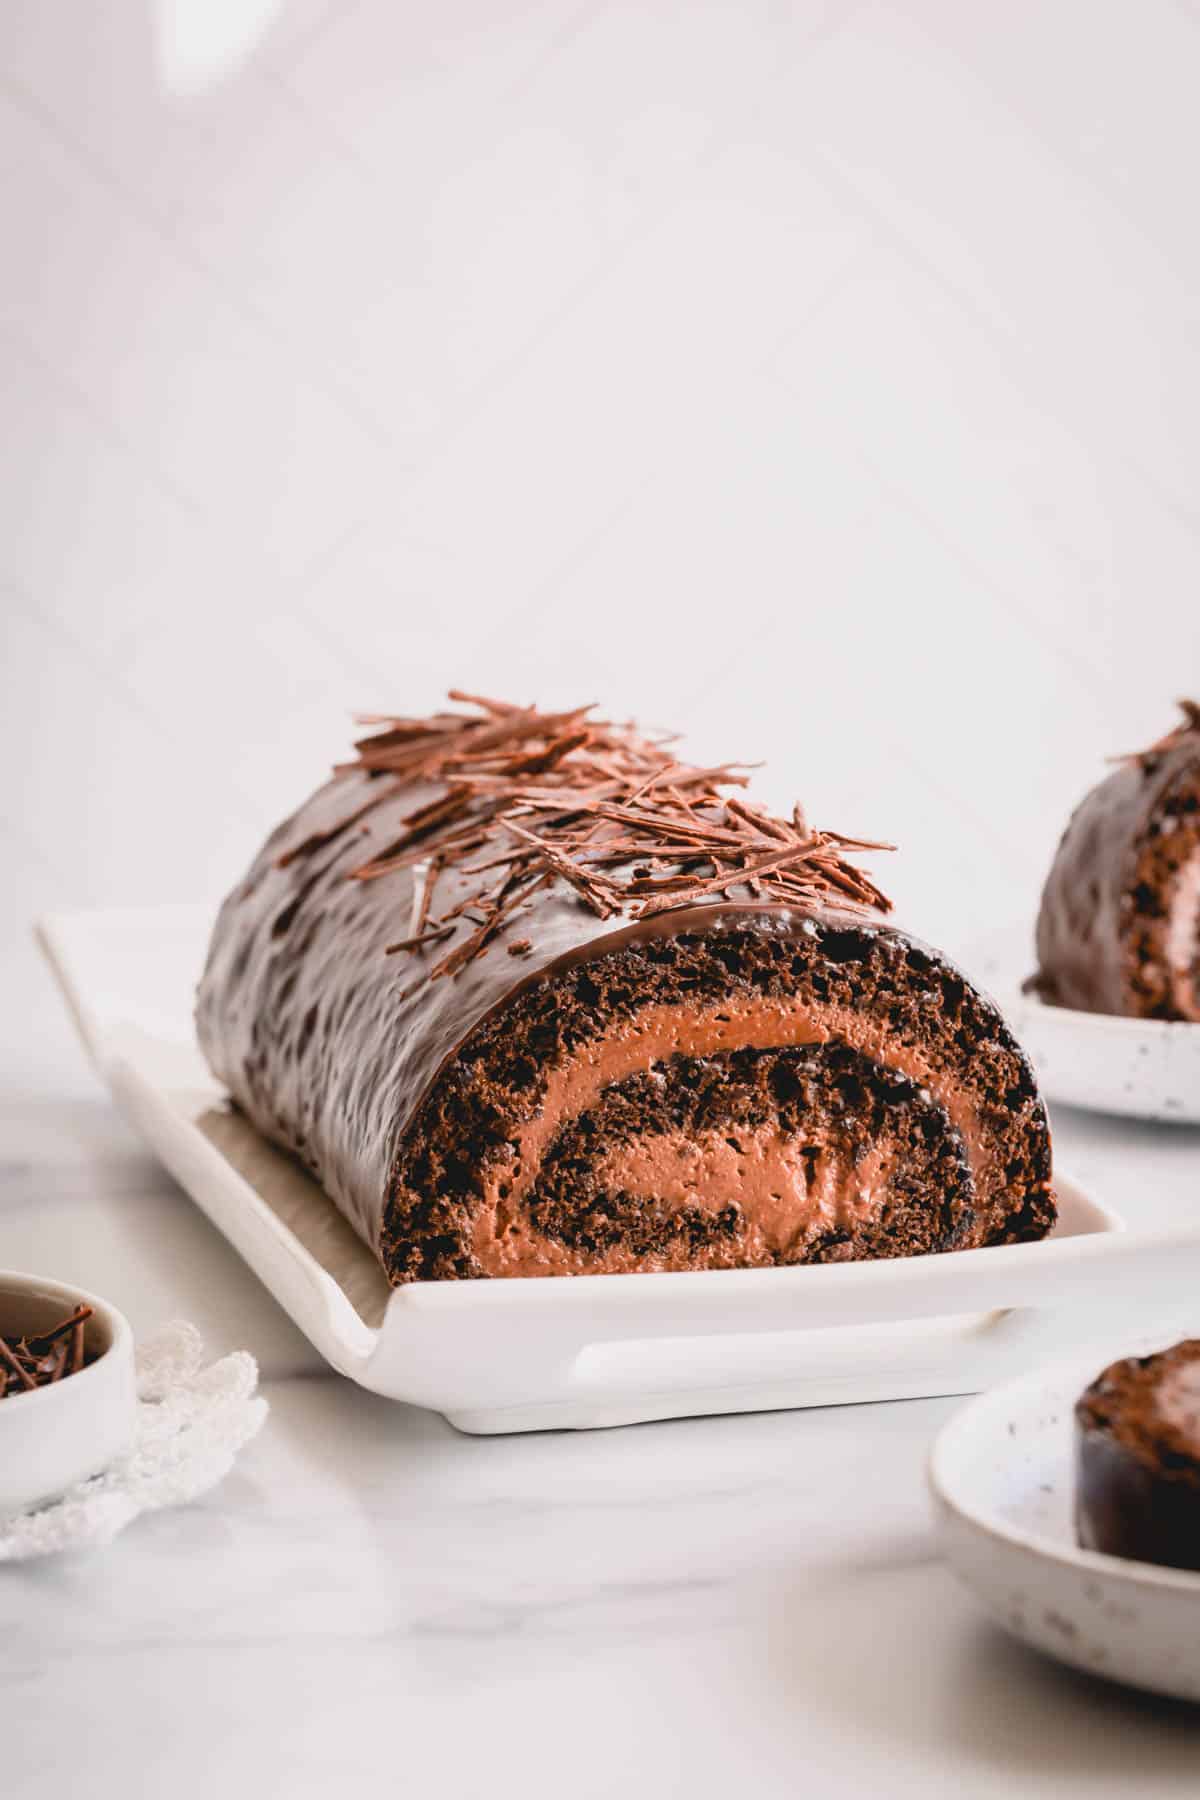 a chocolate swiss roll on a plate